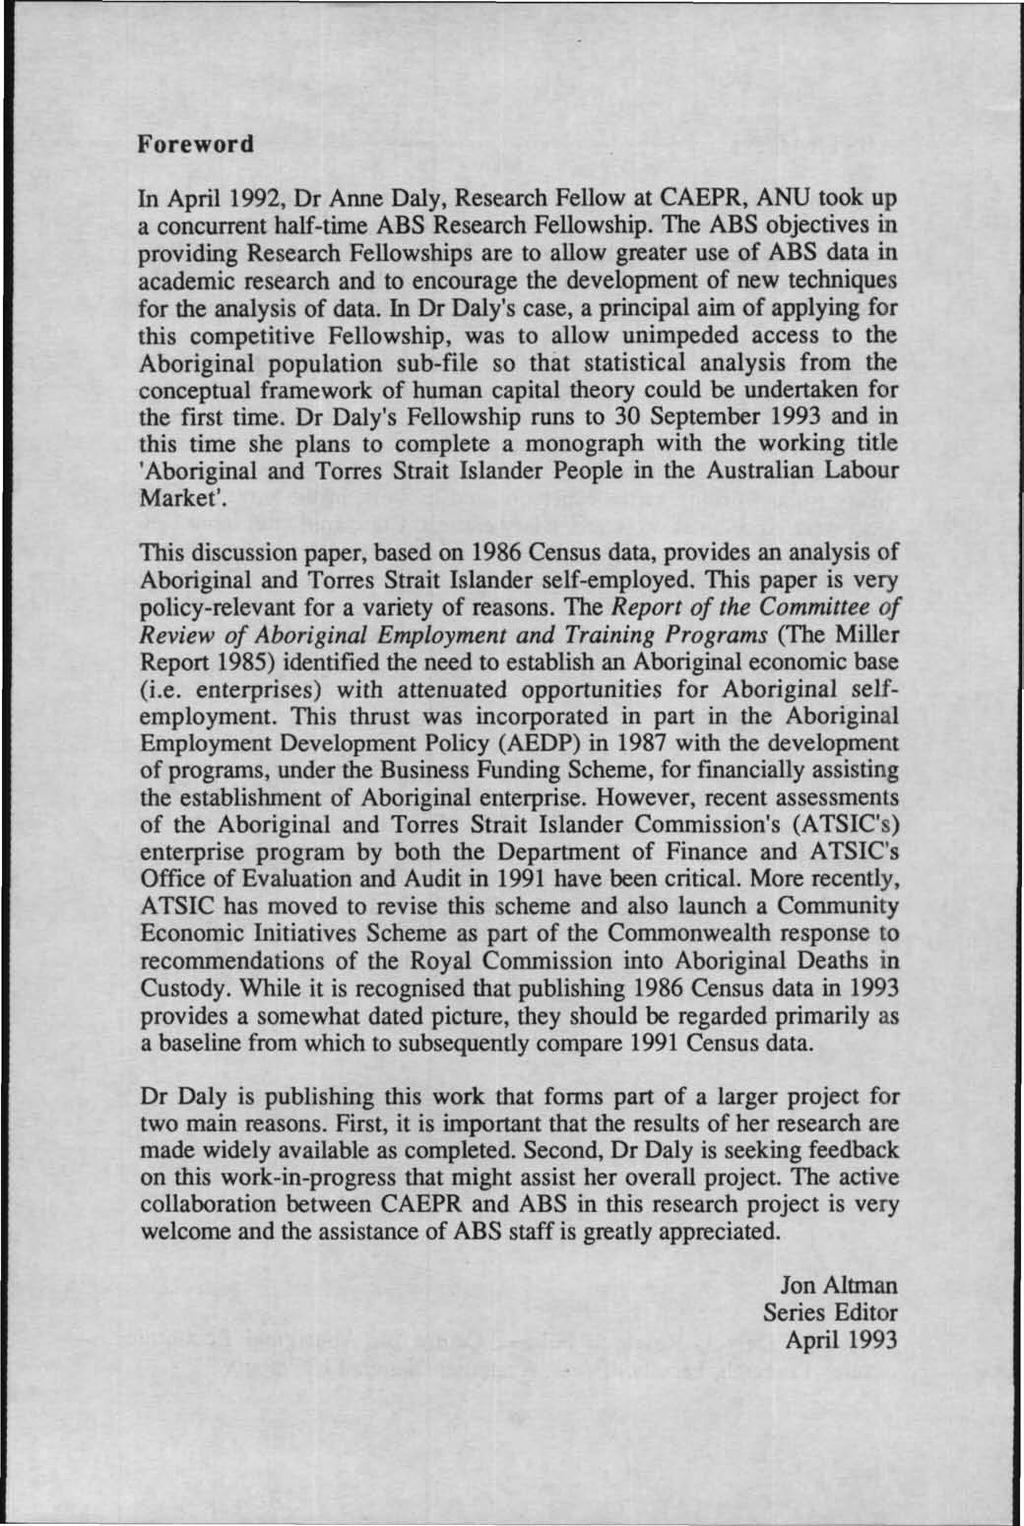 Foreword In April 1992, Dr Anne Daly, Research Fellow at CAEPR, ANU took up a concurrent half-time ABS Research Fellowship.